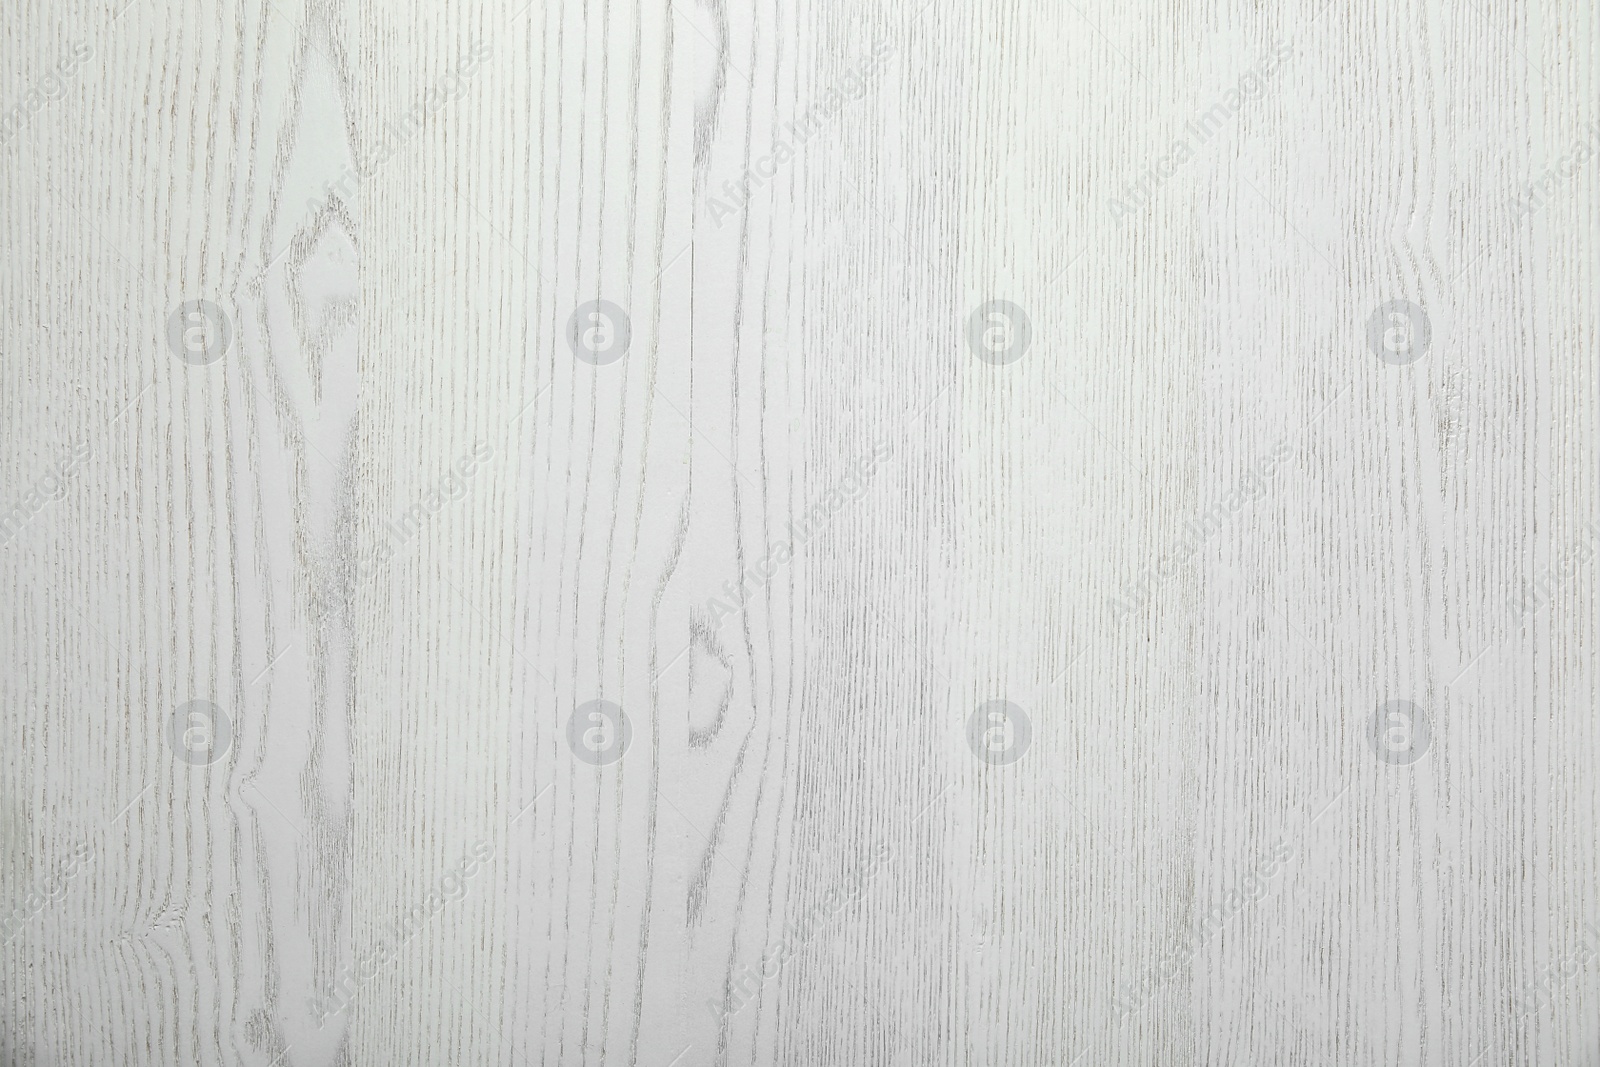 Photo of Texture of wooden surface as background, closeup. Interior element